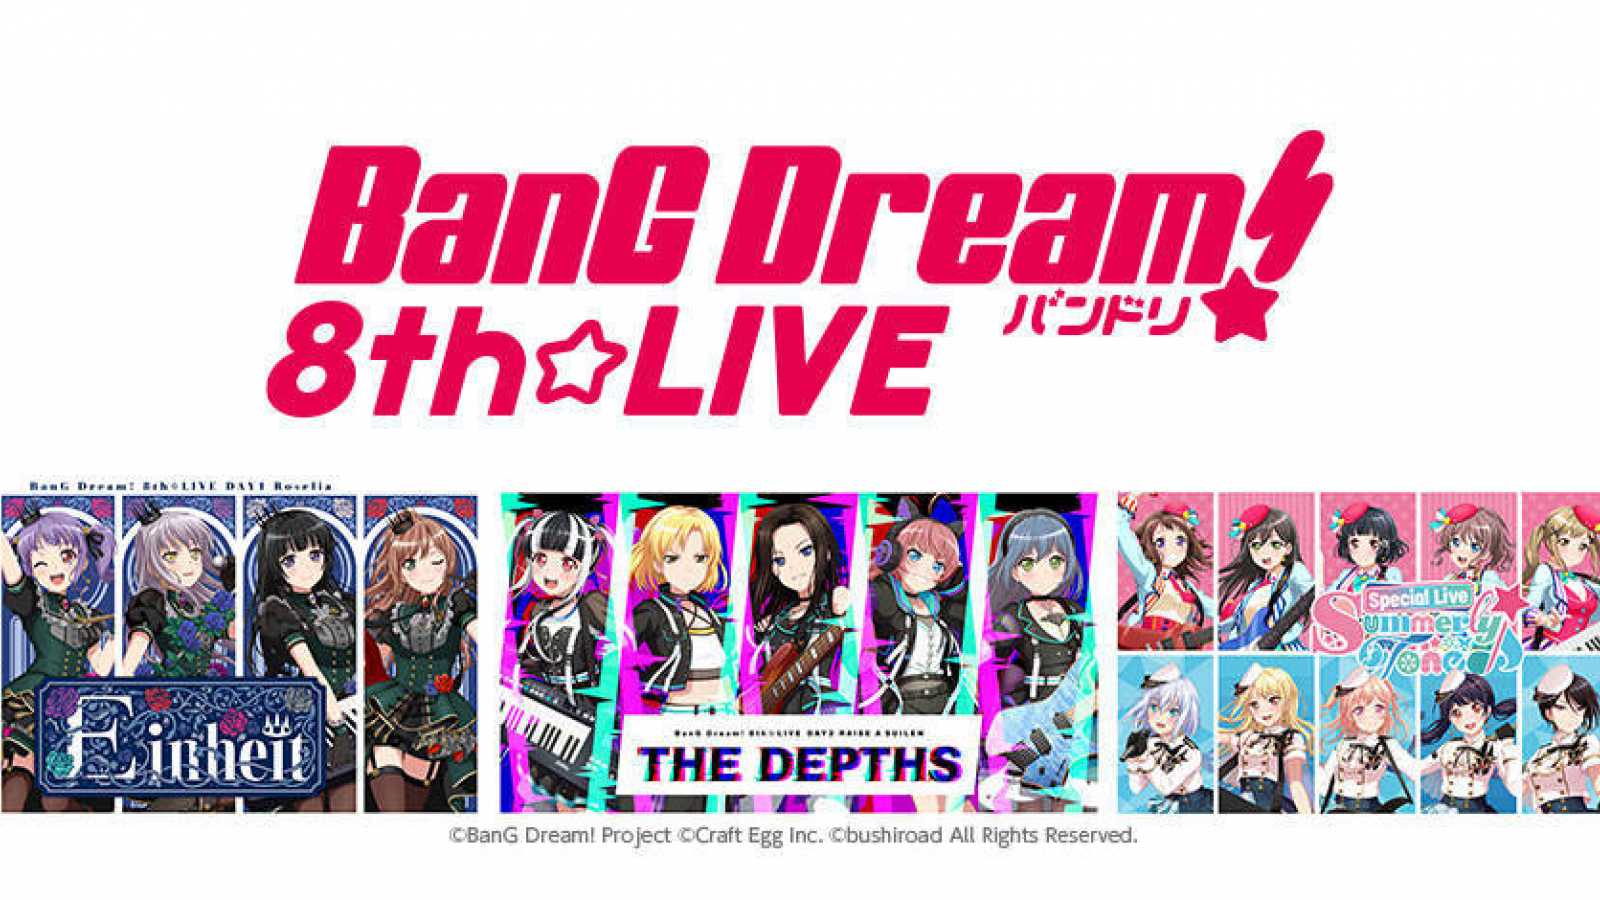 "BanG Dream! 8th☆LIVE" Summer Outdoors 3DAYS to Stream Worldwide © BanG Dream! Project ©Craft Egg Inc. ©bushiroad All Rights Reserved.